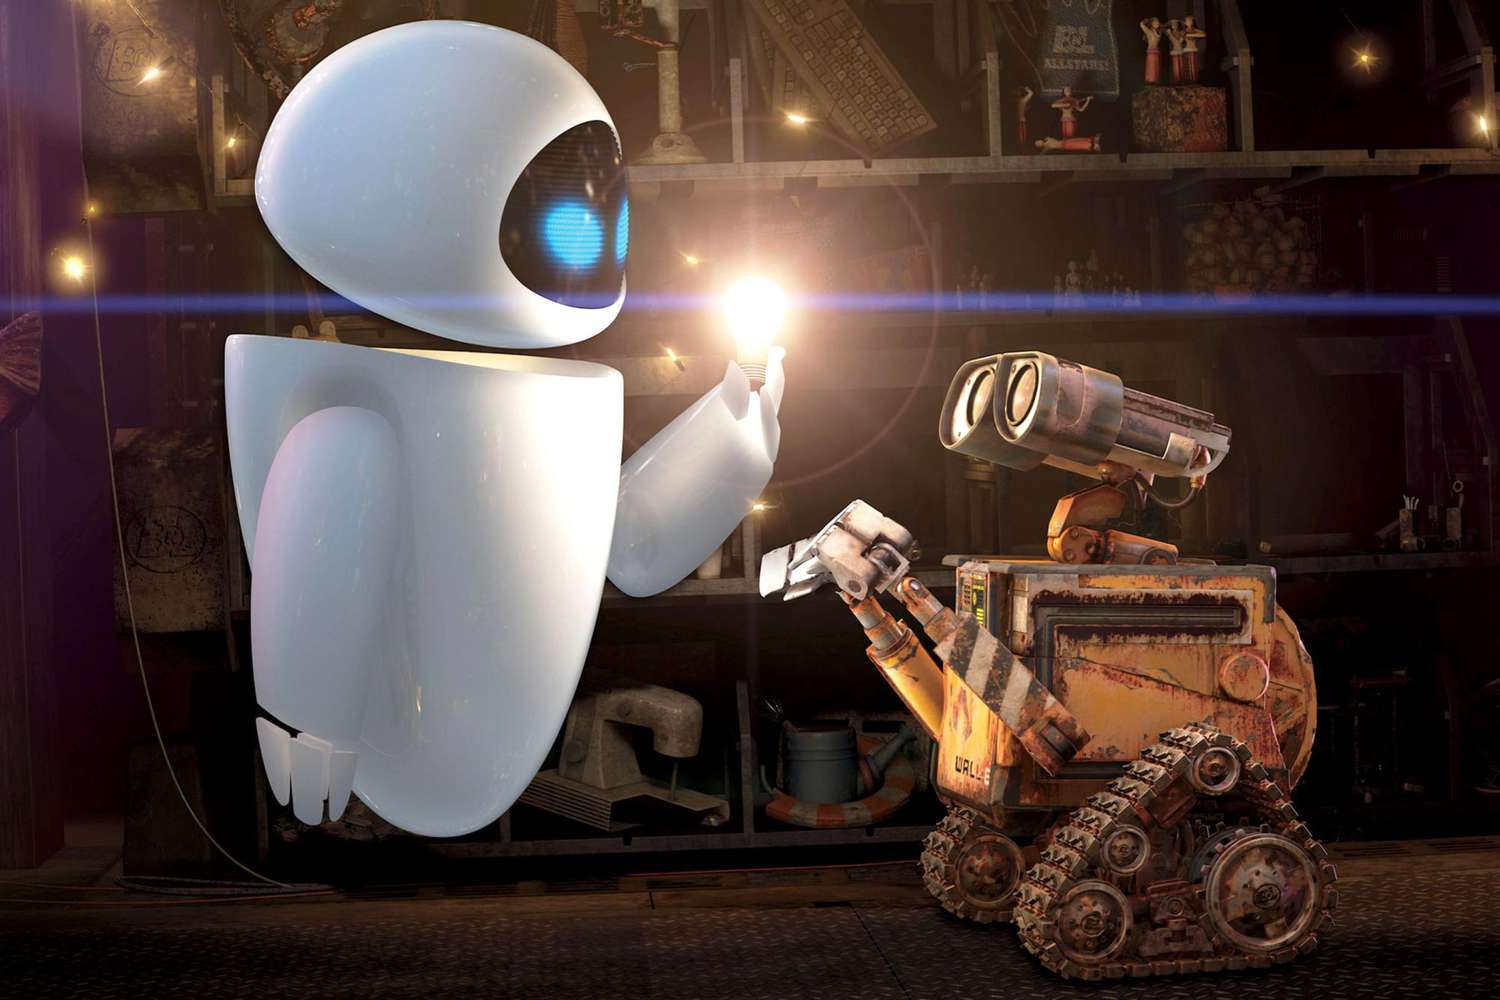 WALL-E, 2008. ©Walt Disney Studios Motion Pictures/courtesy Everett Collection